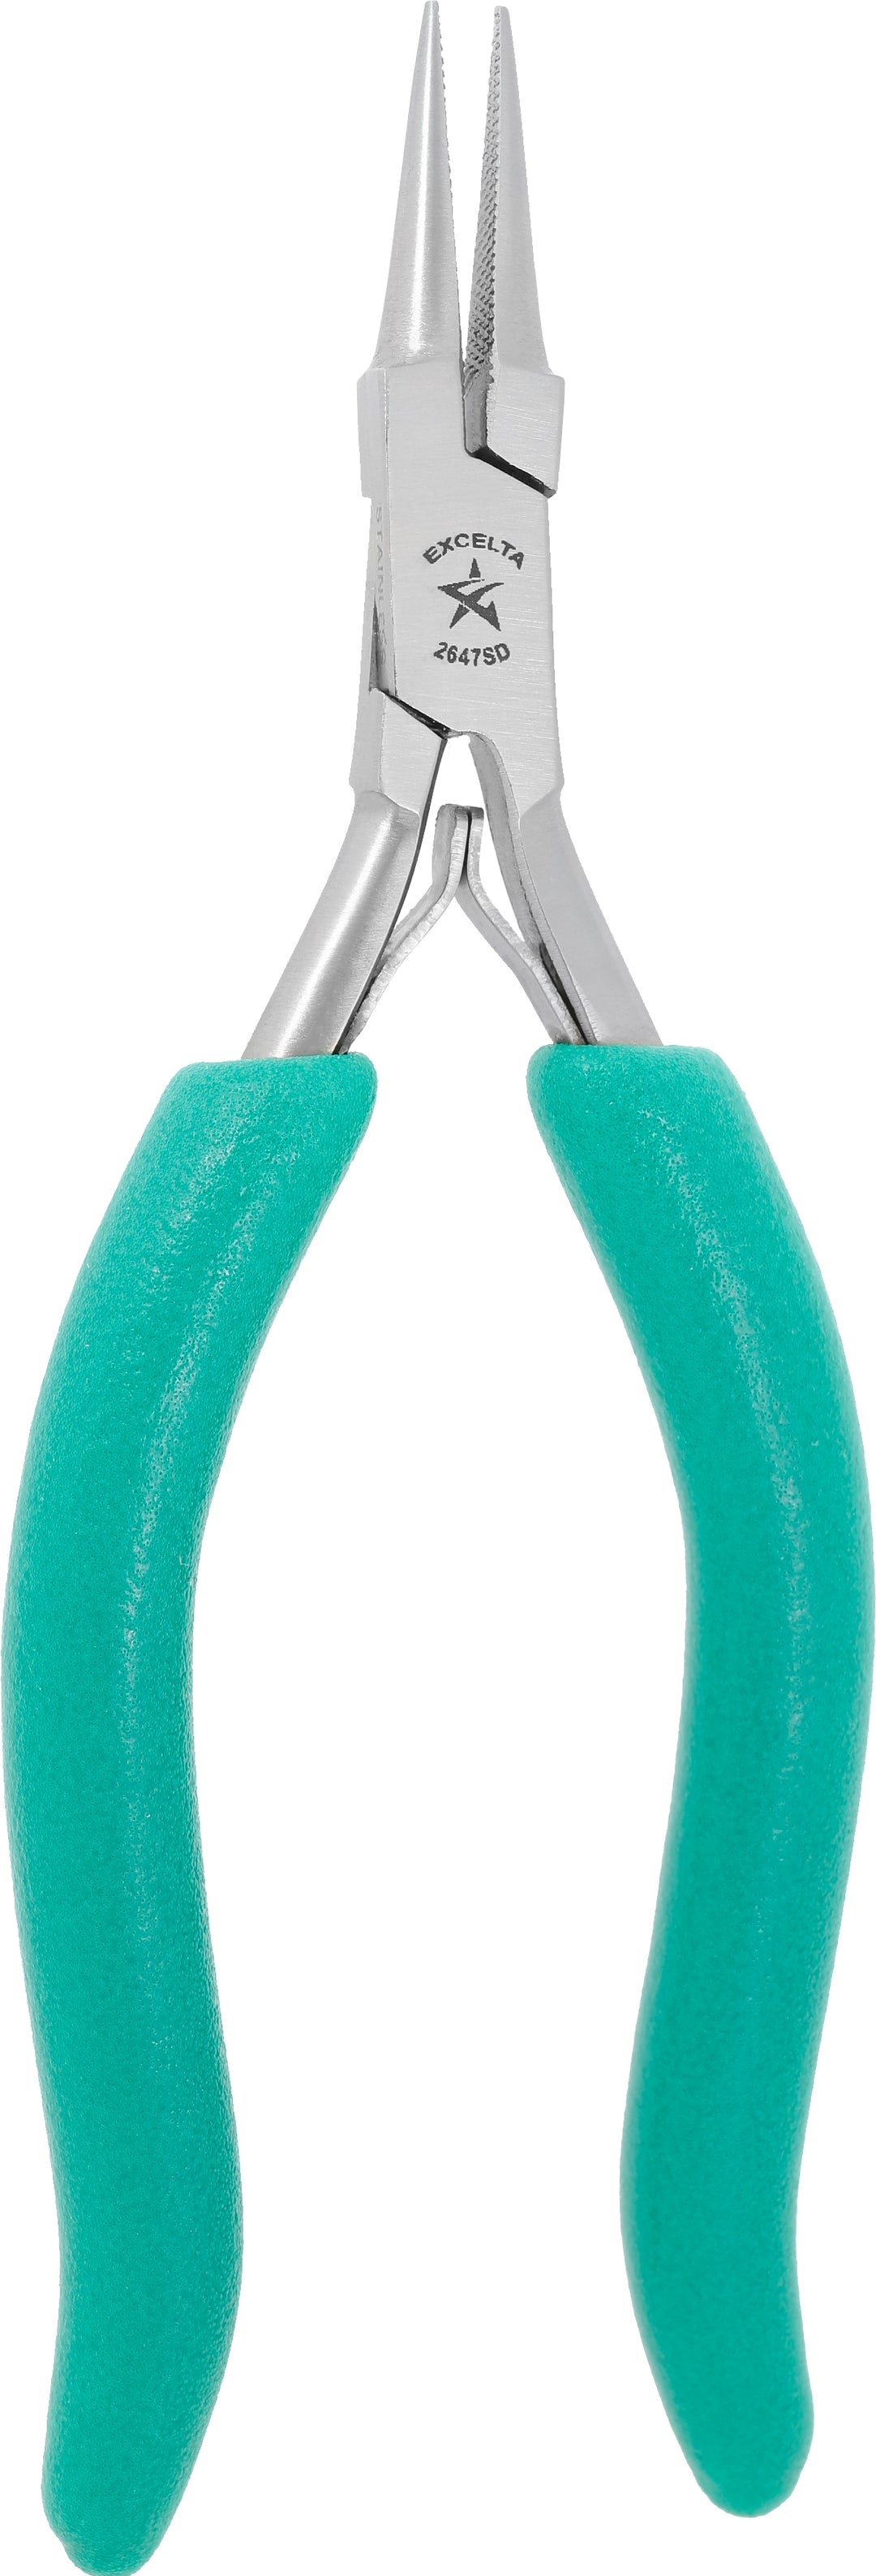 Excelta 2647SD Pliers - 2 Star Small Needle Nose - SS - Long 'S' Handle - Serrated Jaws